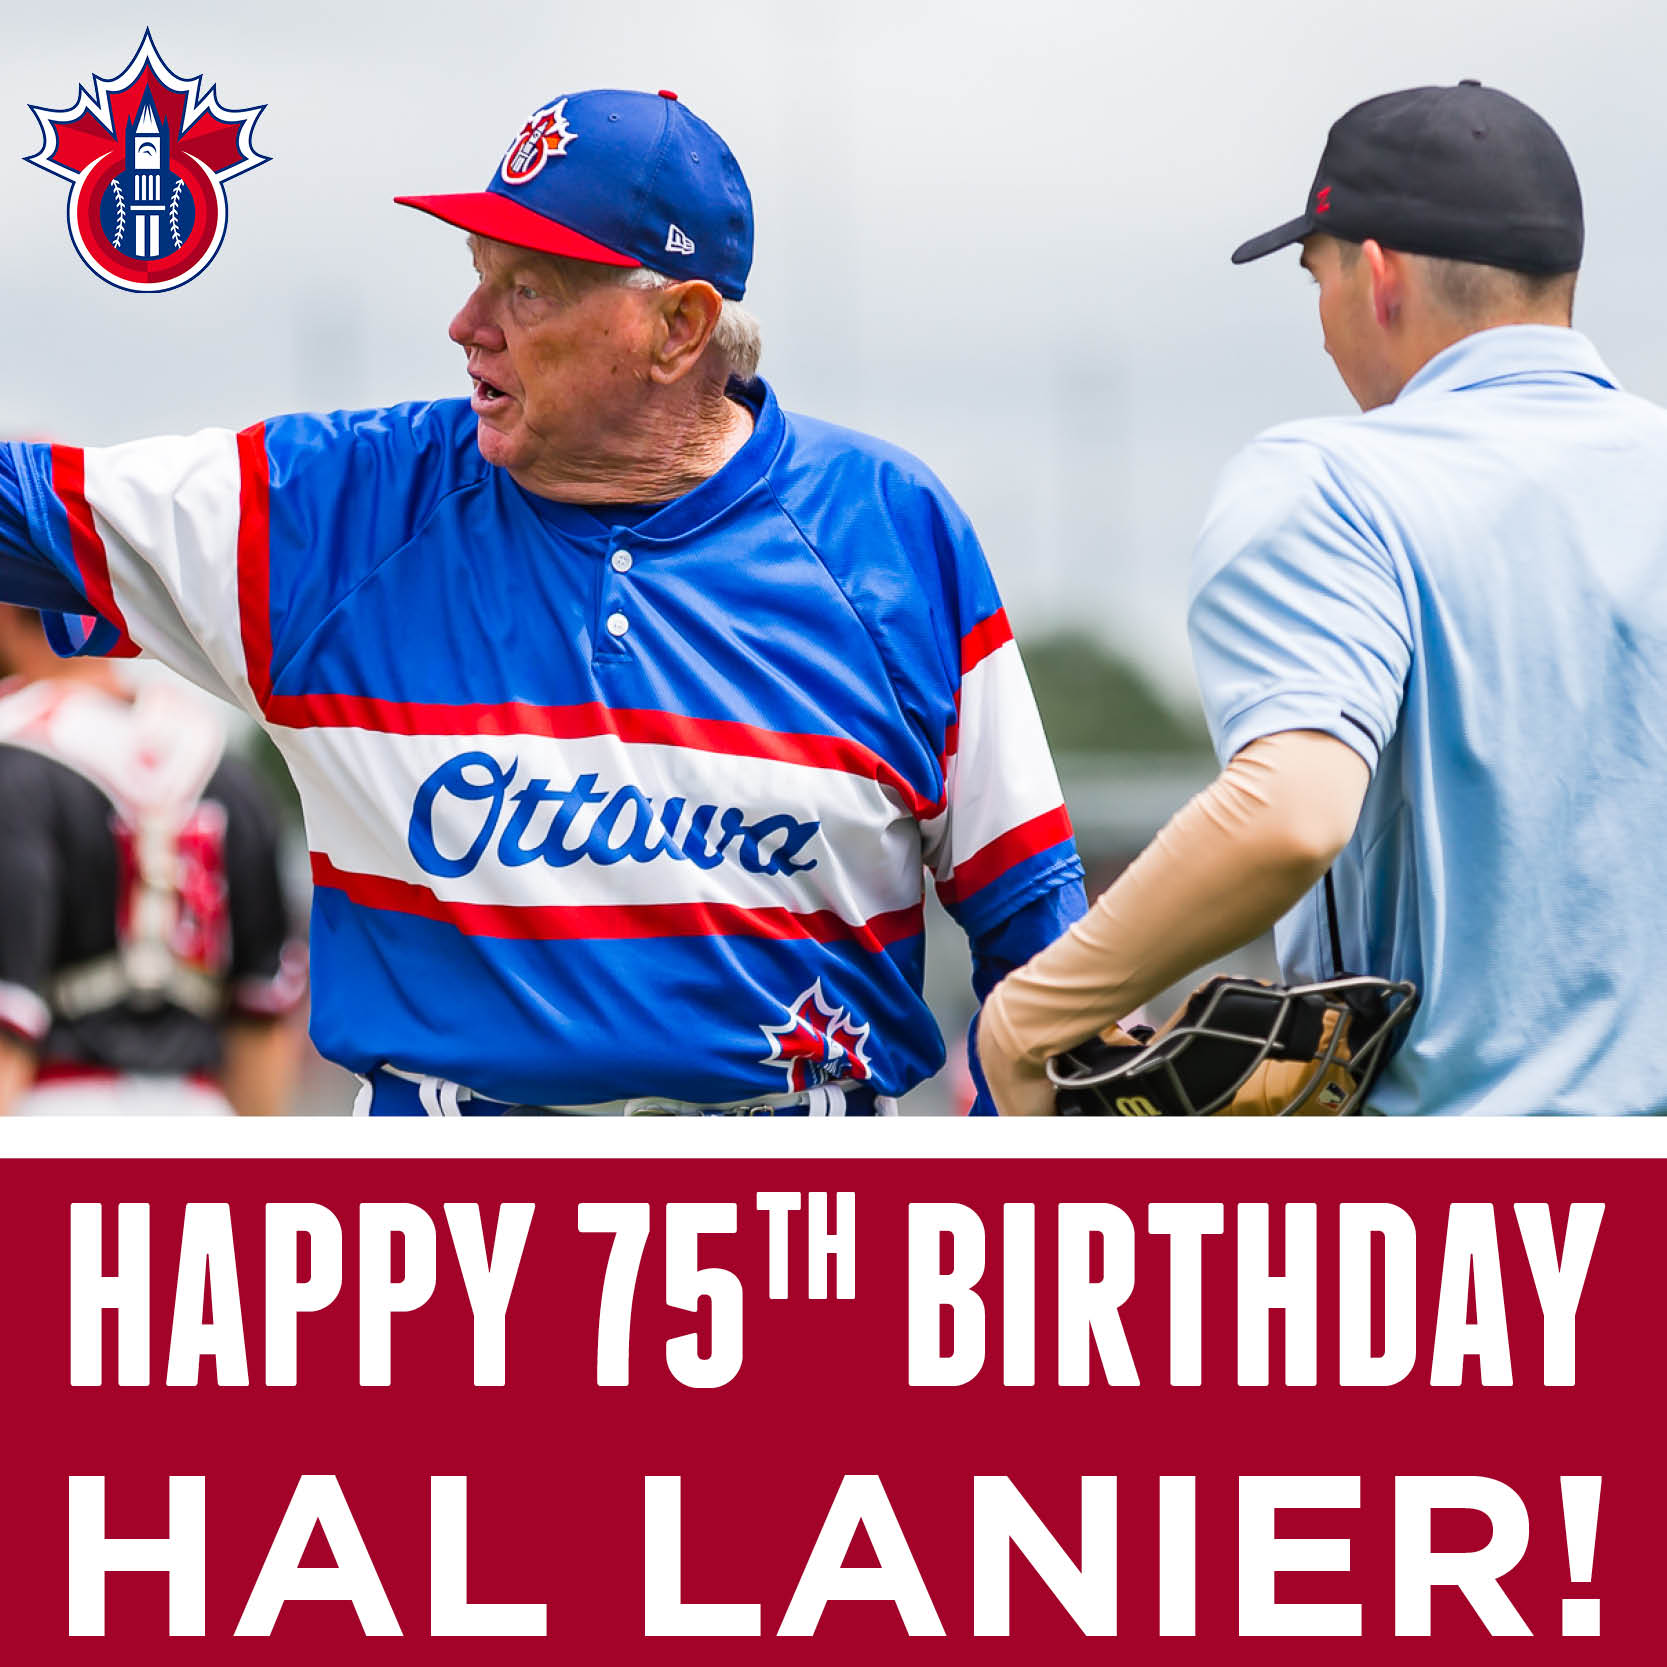 We\re sure America is honoured to share a birthday with the one and only Hal Lanier!

Happy birthday, Hal.   